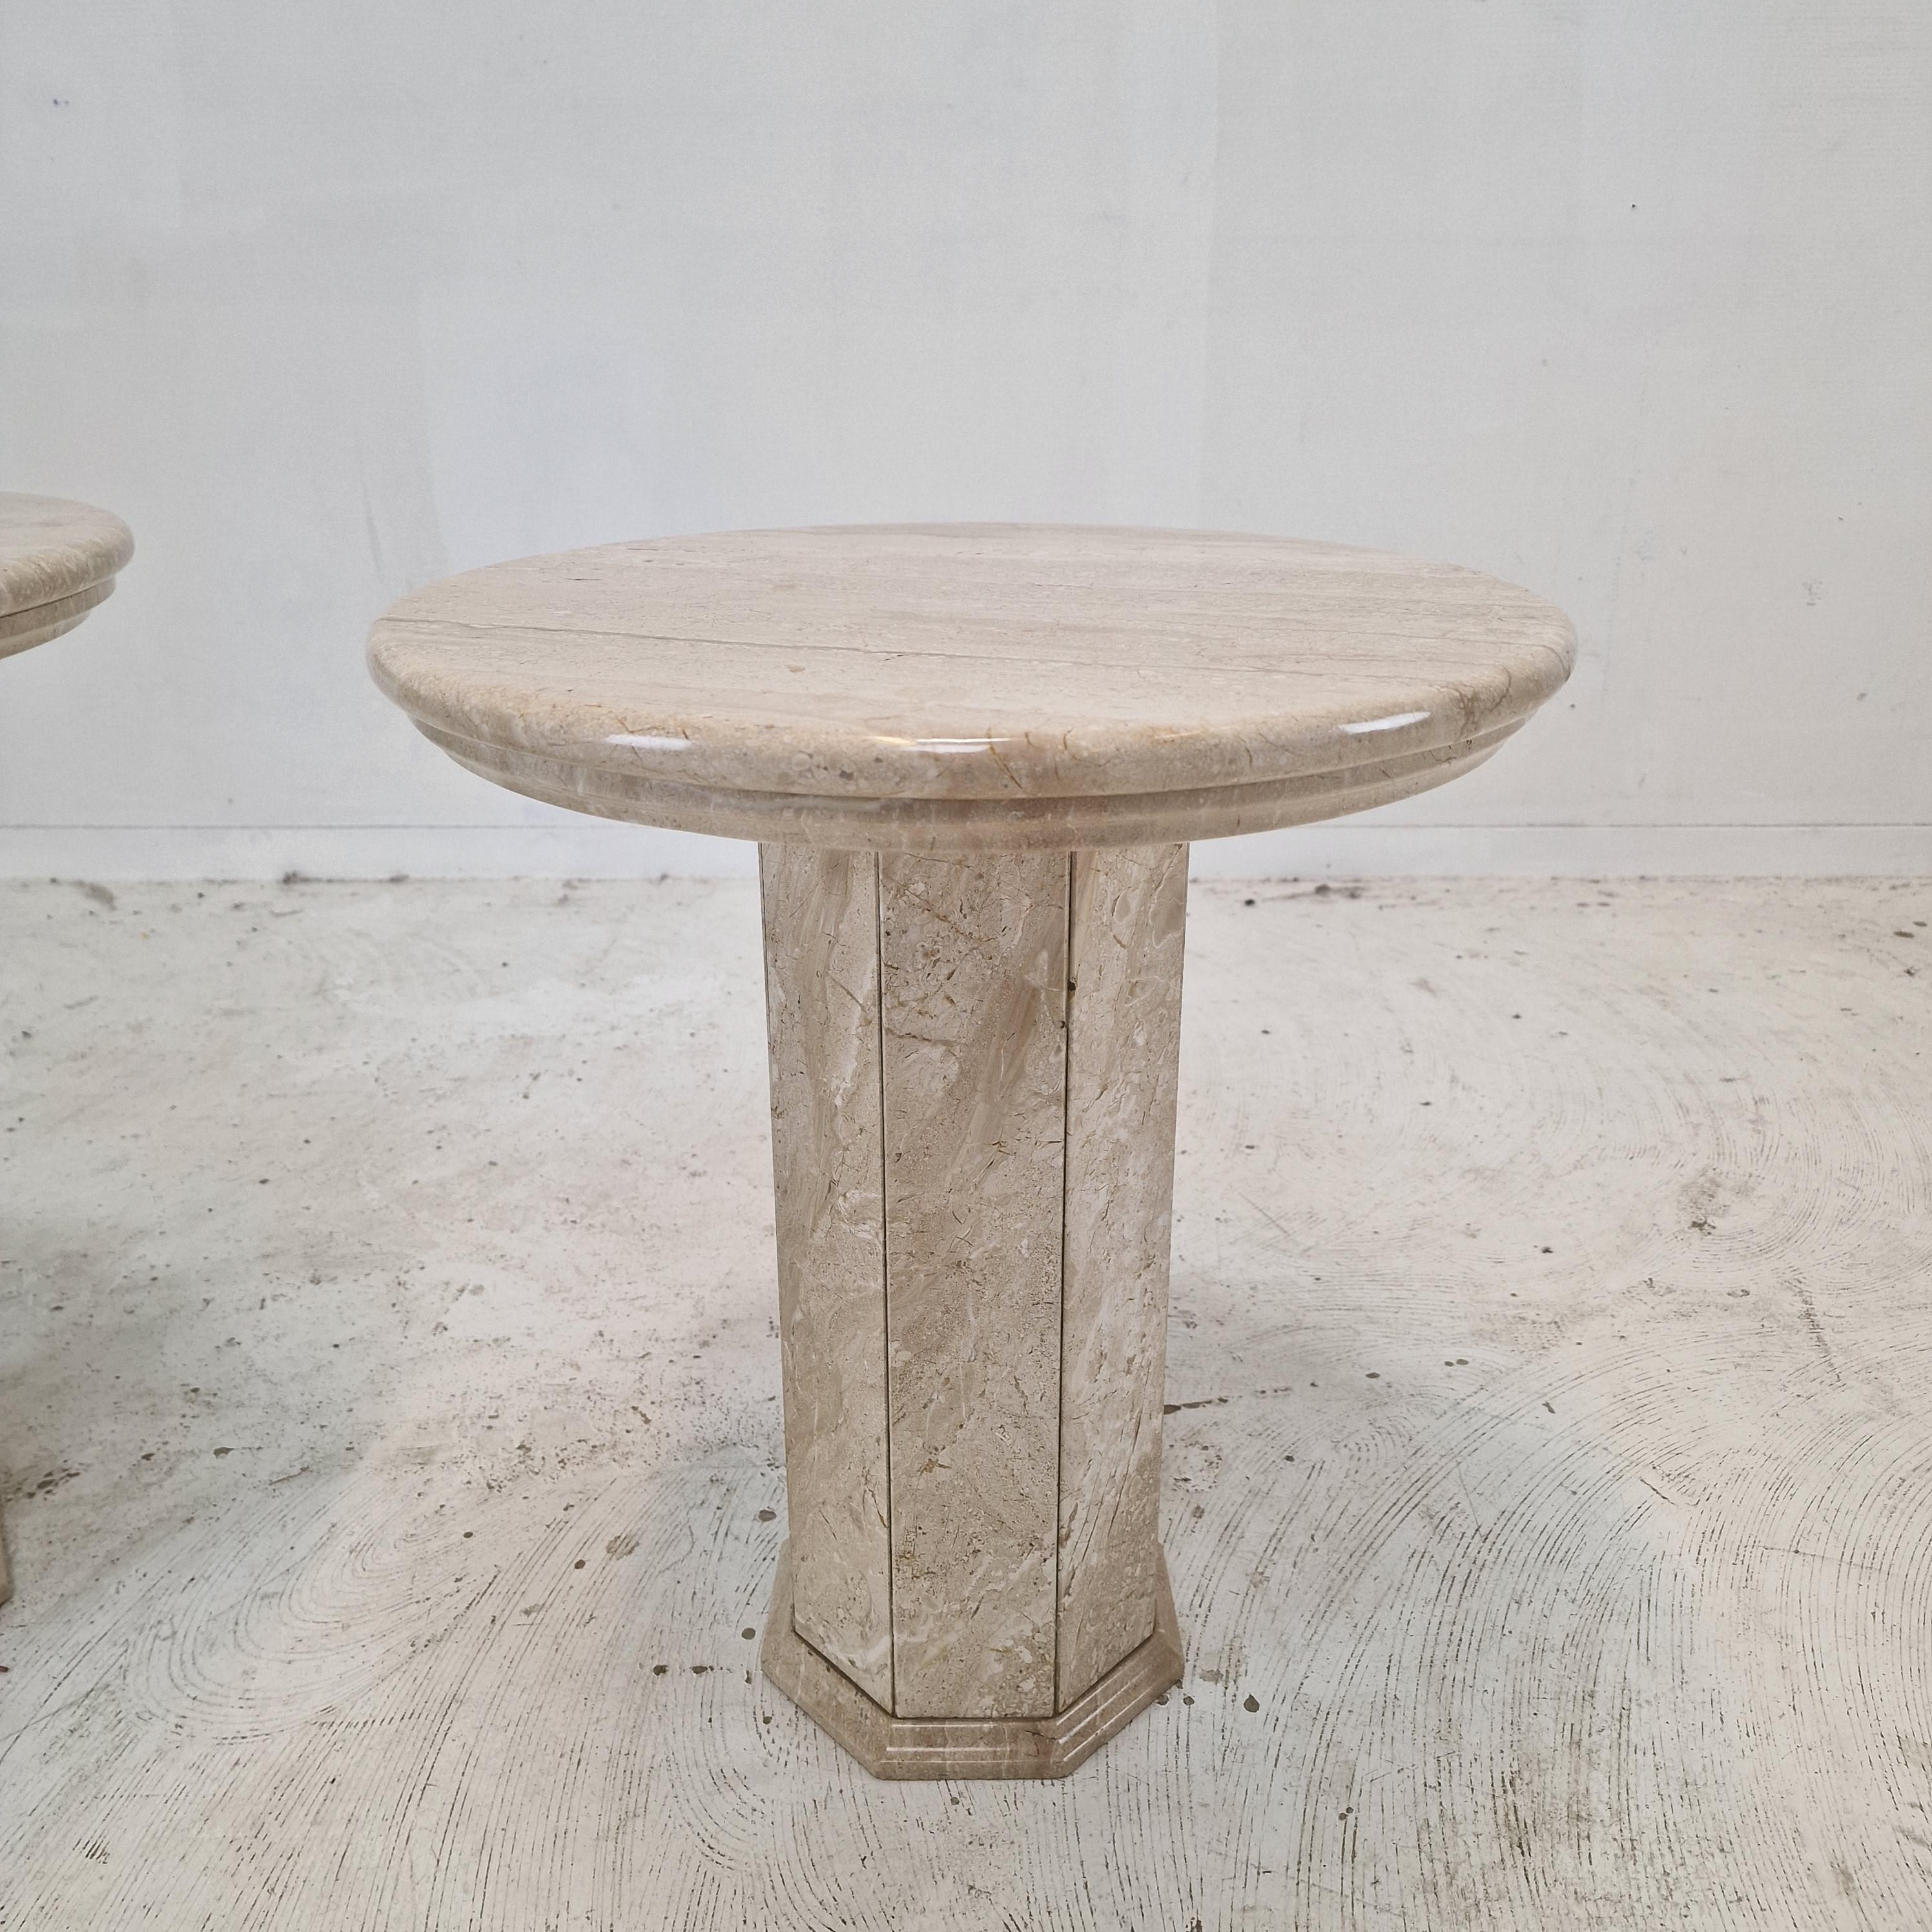 Set of 2 Italian Travertine Pedestals or Side Tables, 1980s For Sale 4